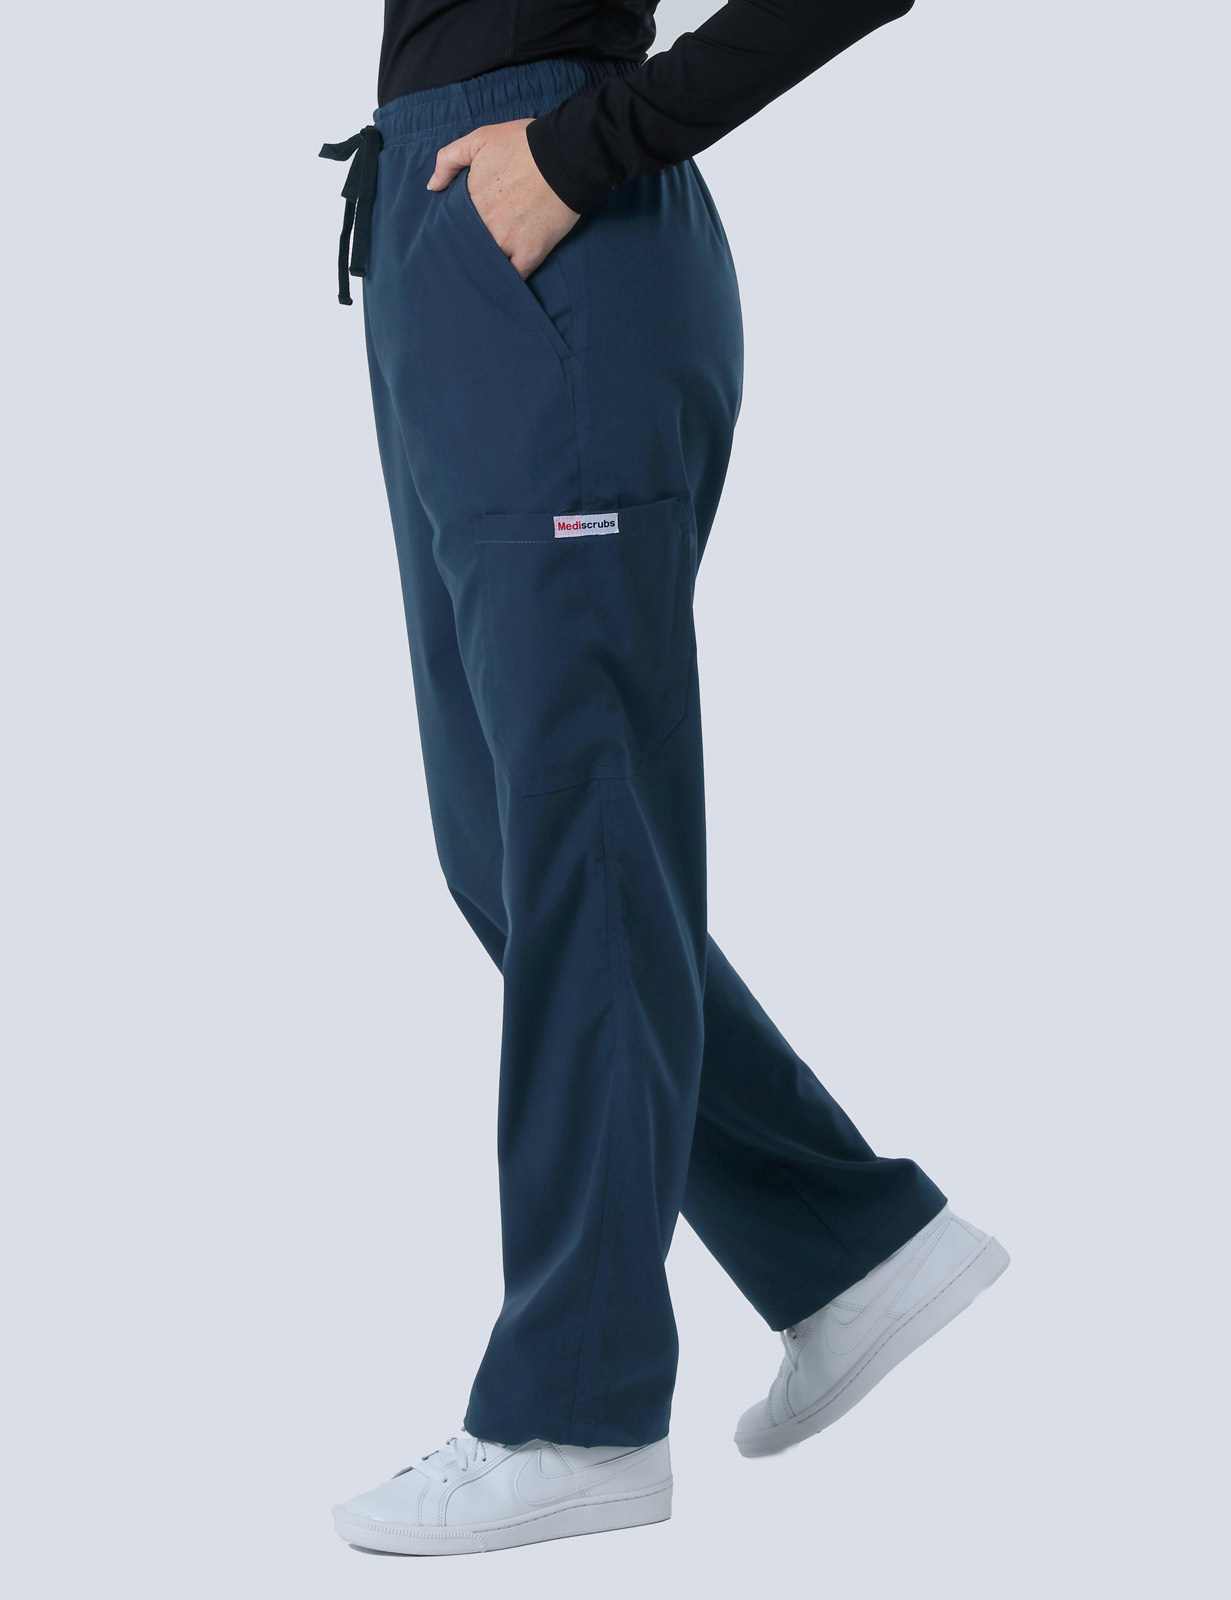 PAH - Nuclear Medicine (4 Pocket Scrub Top and Cargo Pants in Navy incl Logos)